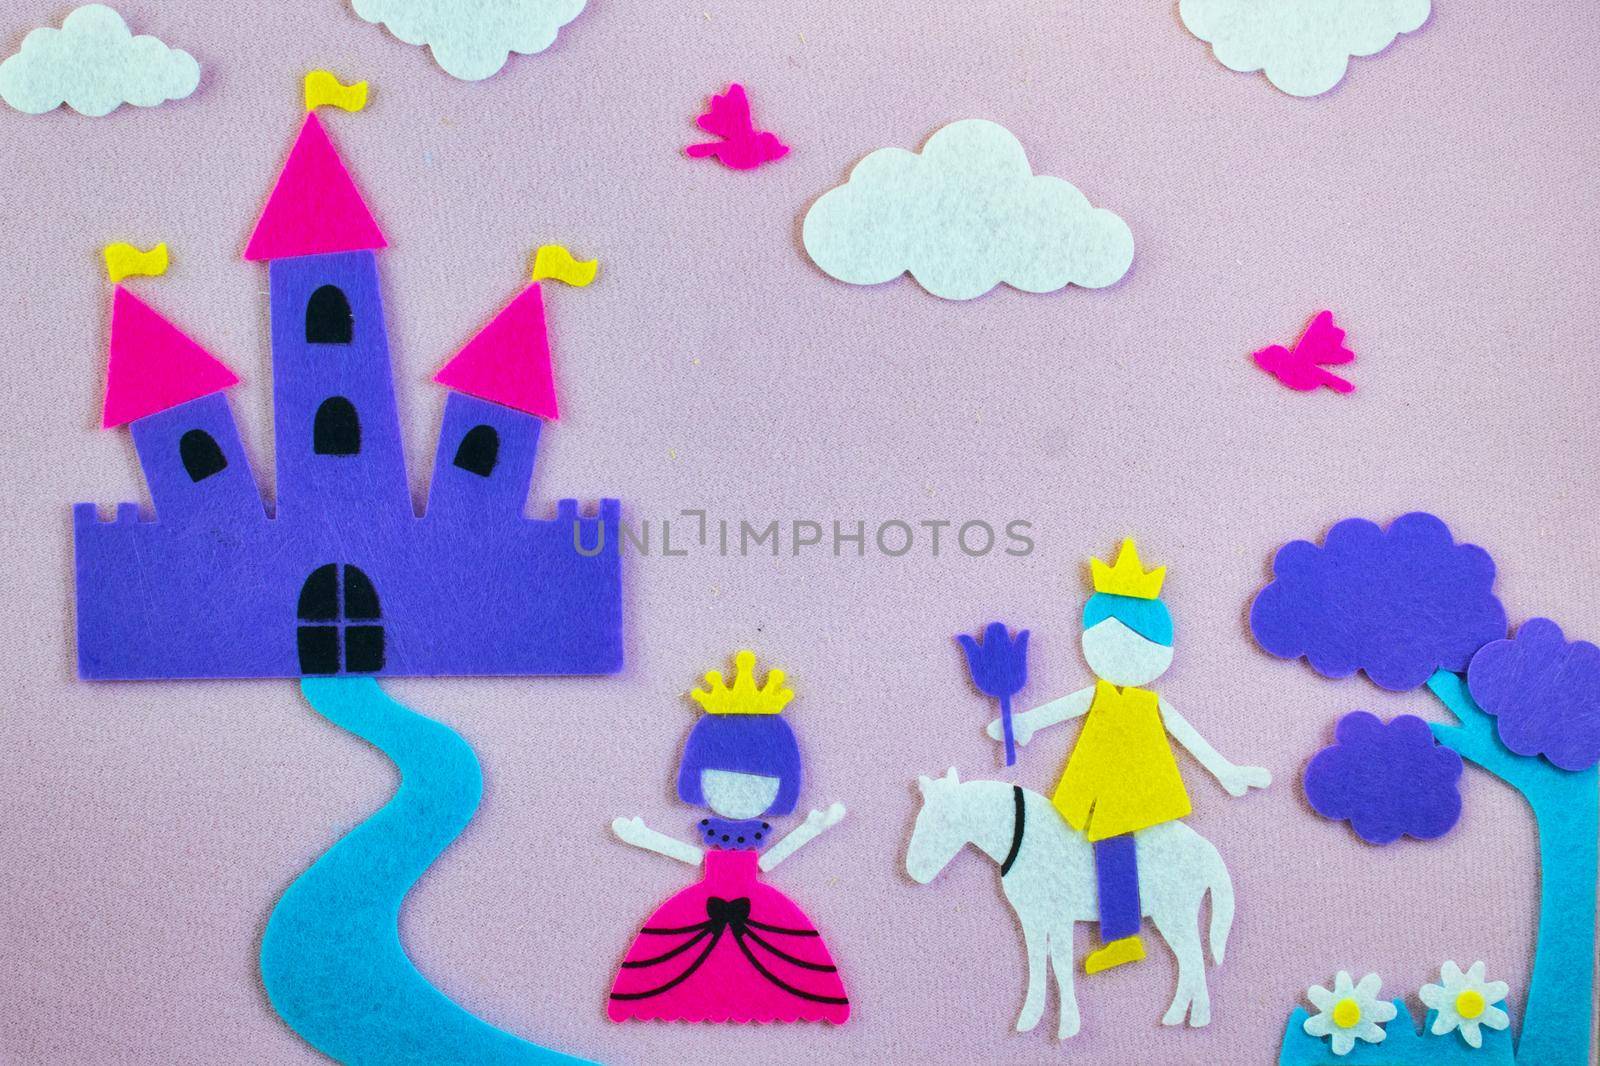 Cute fairy tale scene in felt with a princess and a prince in love in front of a fantasy castle